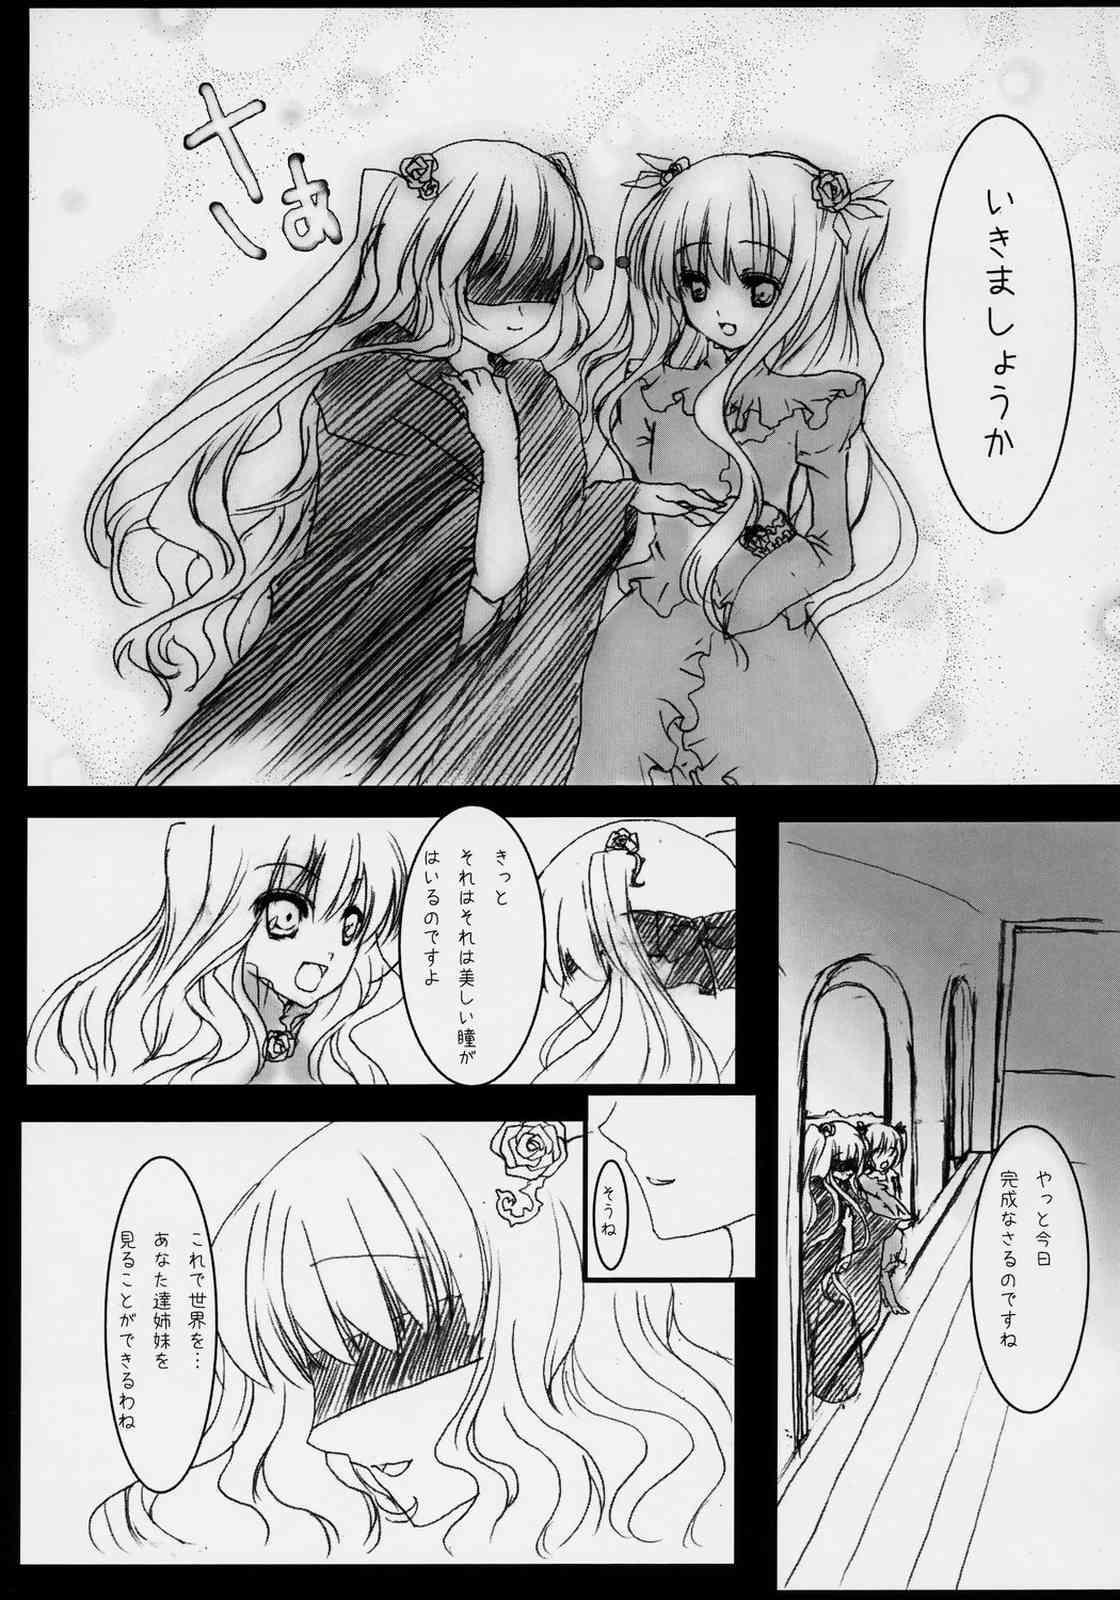 Amazing Dependence - Rozen maiden Hard Core Porn - Page 8